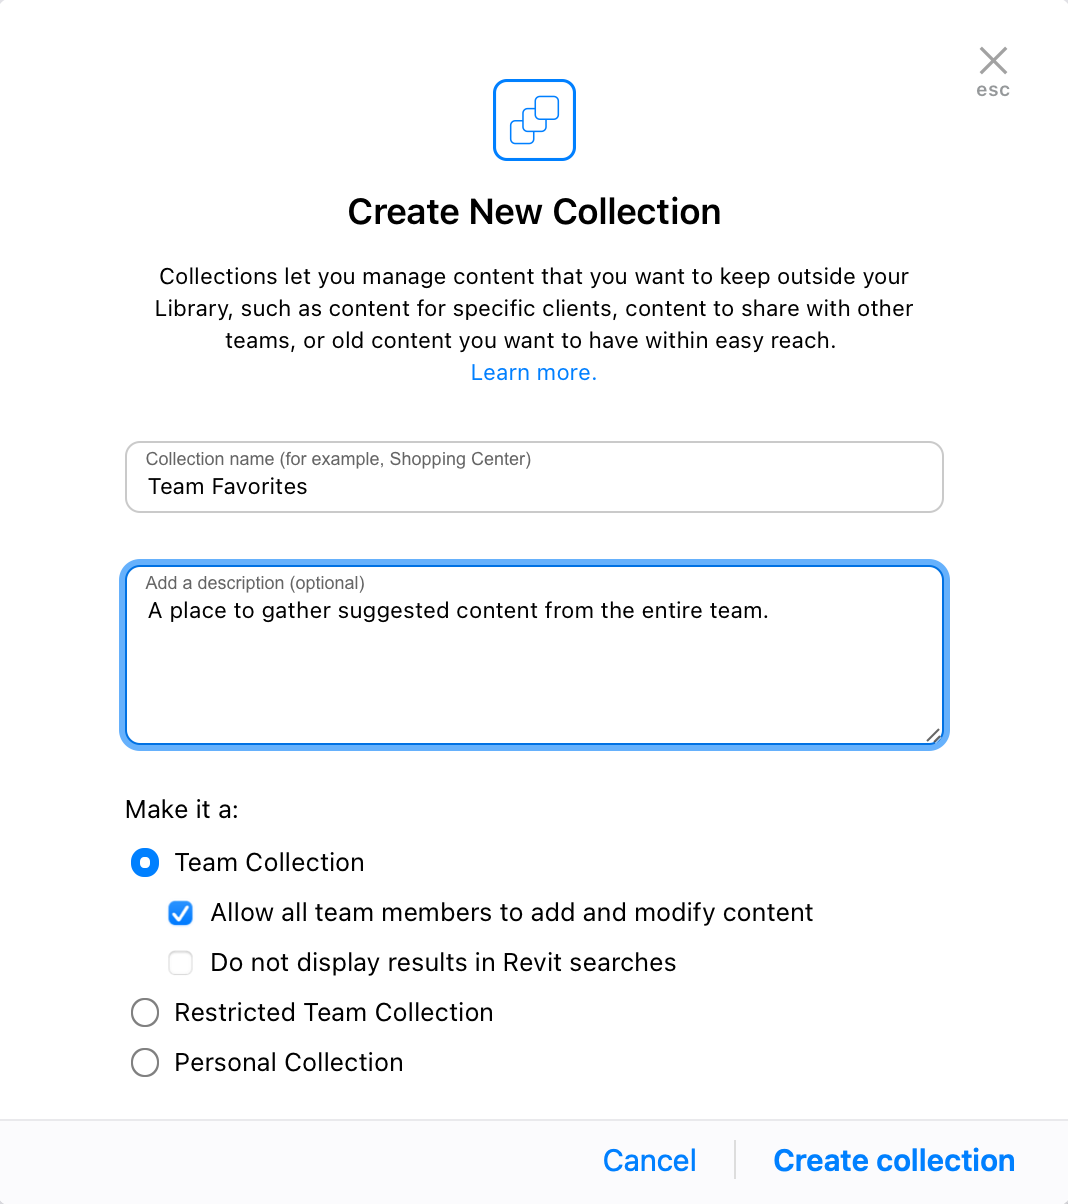 Create New Collection dialog showing the new option to "Allow all team members to add and modify content".